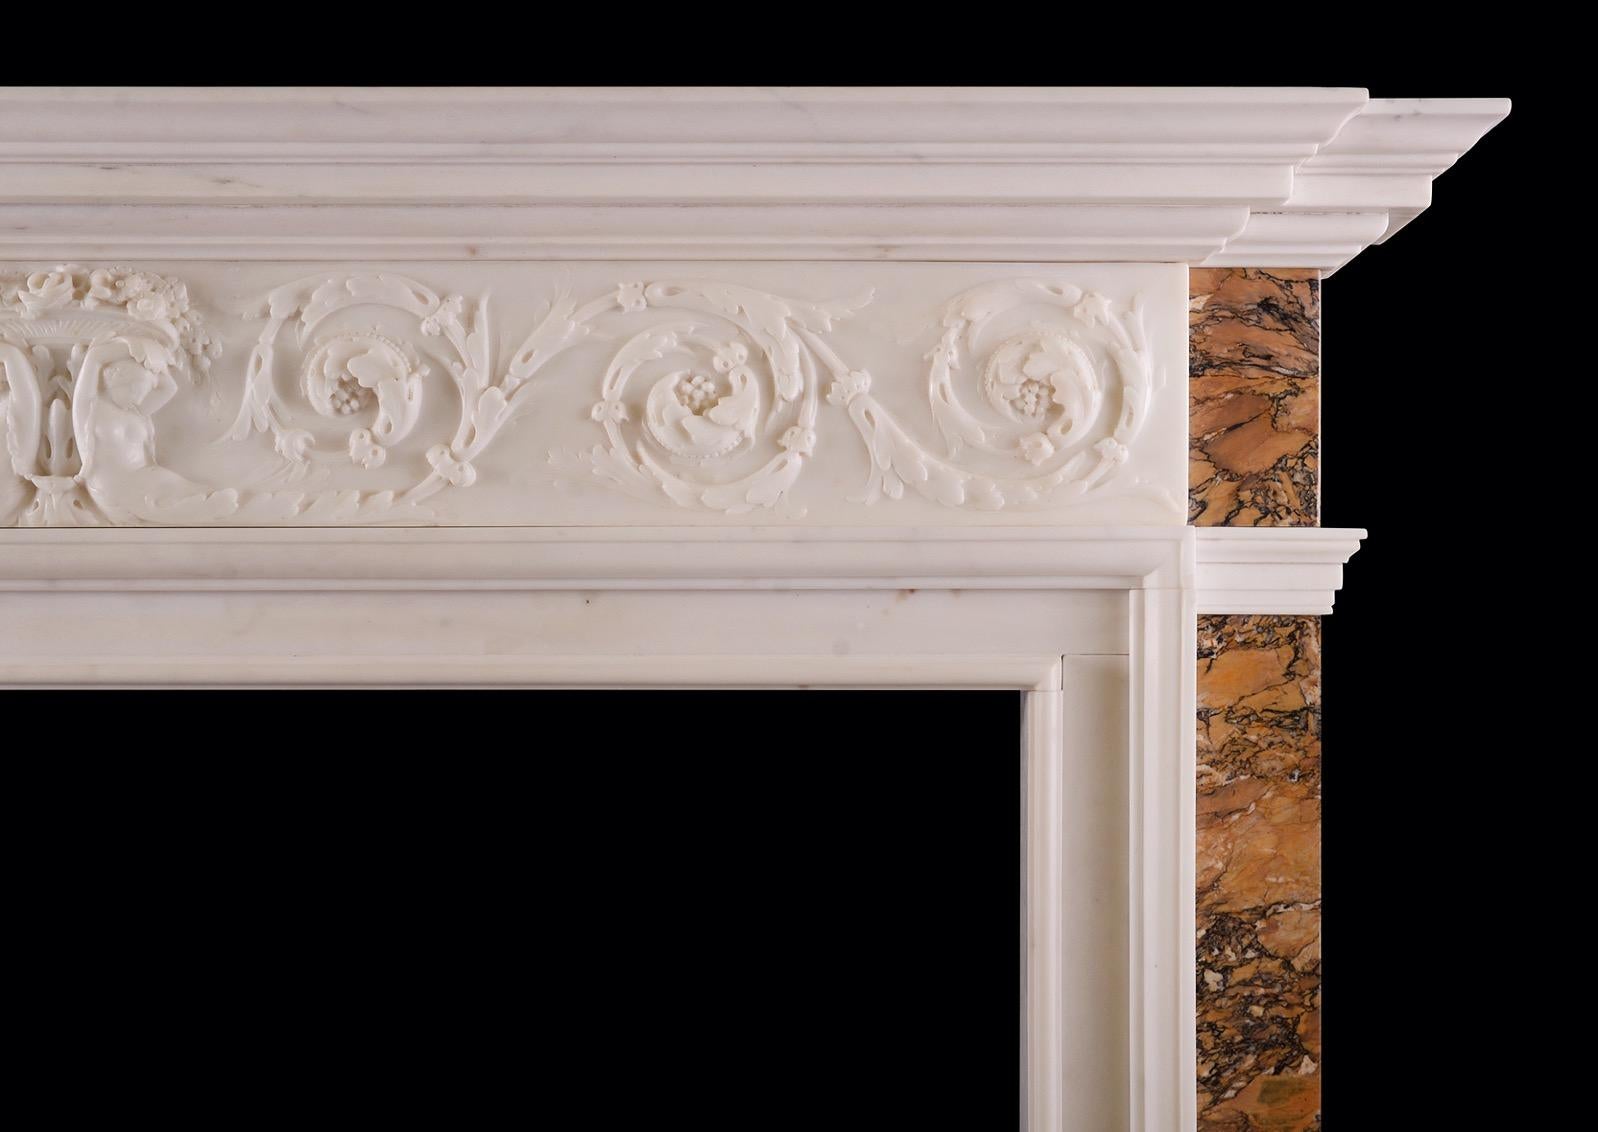 A fine quality Statuary white marble fireplace with Italian Sienna marble inlay. The delicately carved frieze featuring scrolled leaves and bellflowers, with central female figures surmounted by cascading flowers and foliage. The jambs inlaid with